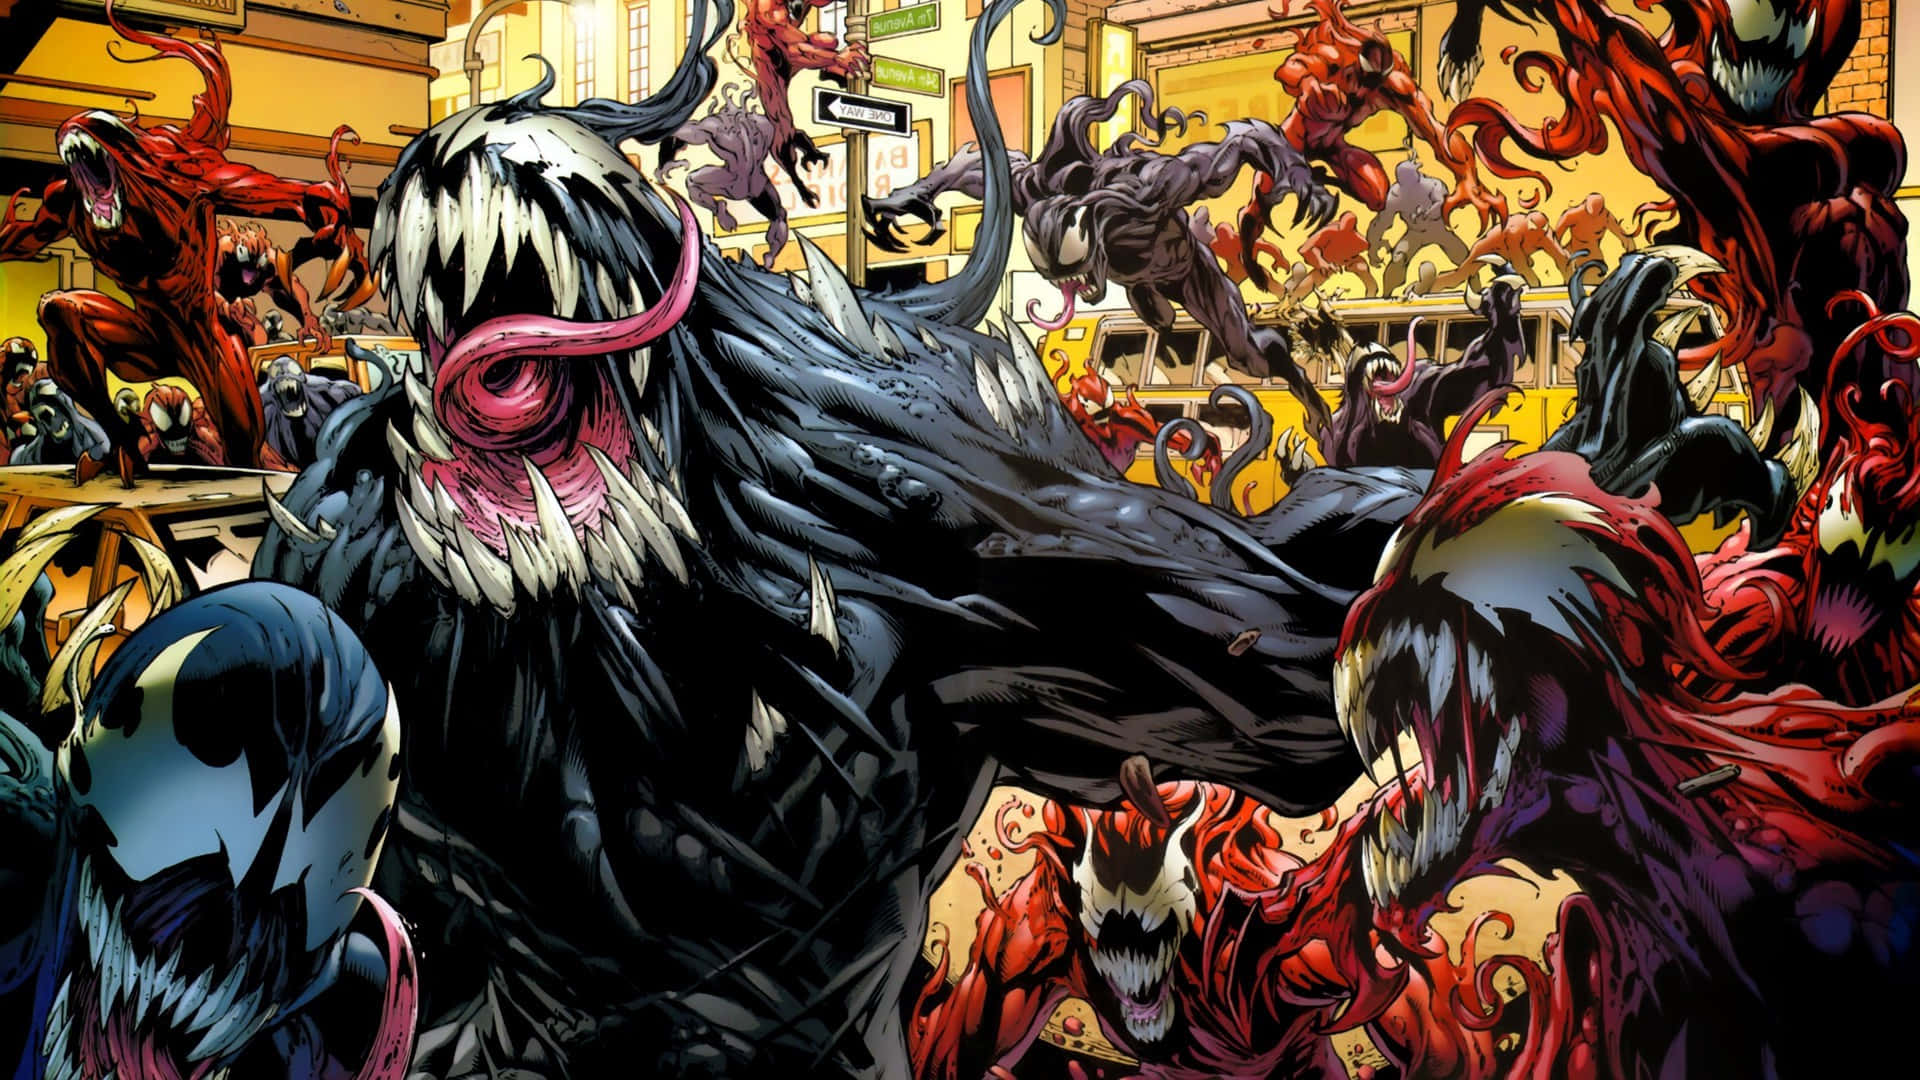 A thrilling battle of good versus evil, Venom takes on Carnage in an epic battle of strength! Wallpaper